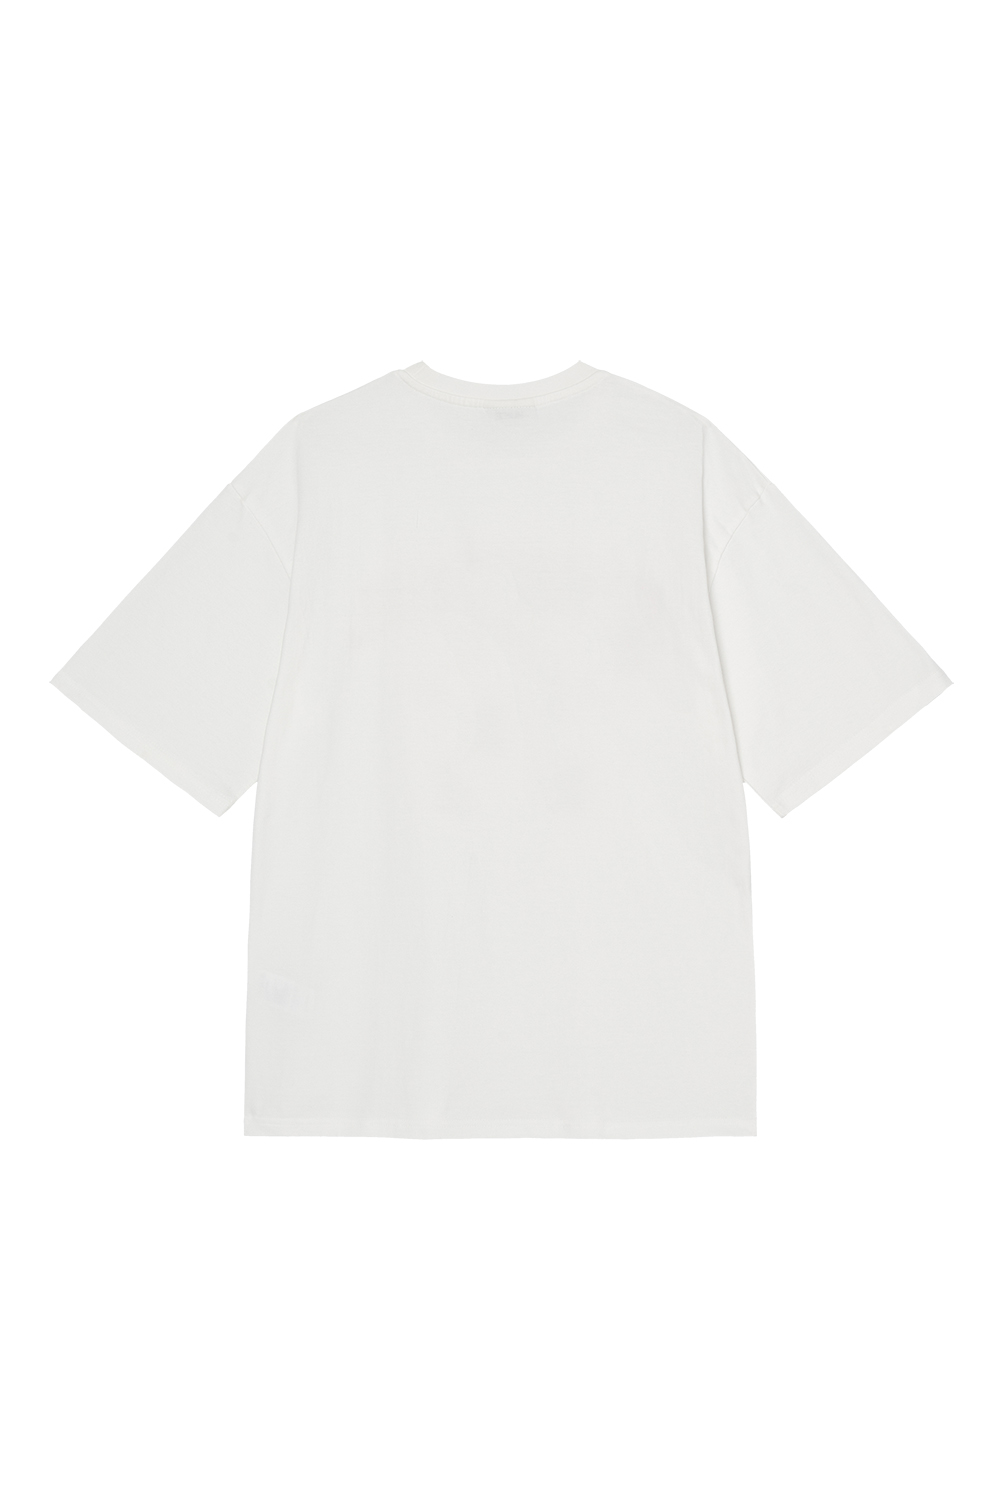 M NEW NORMAL T-SHIRTS WHITE